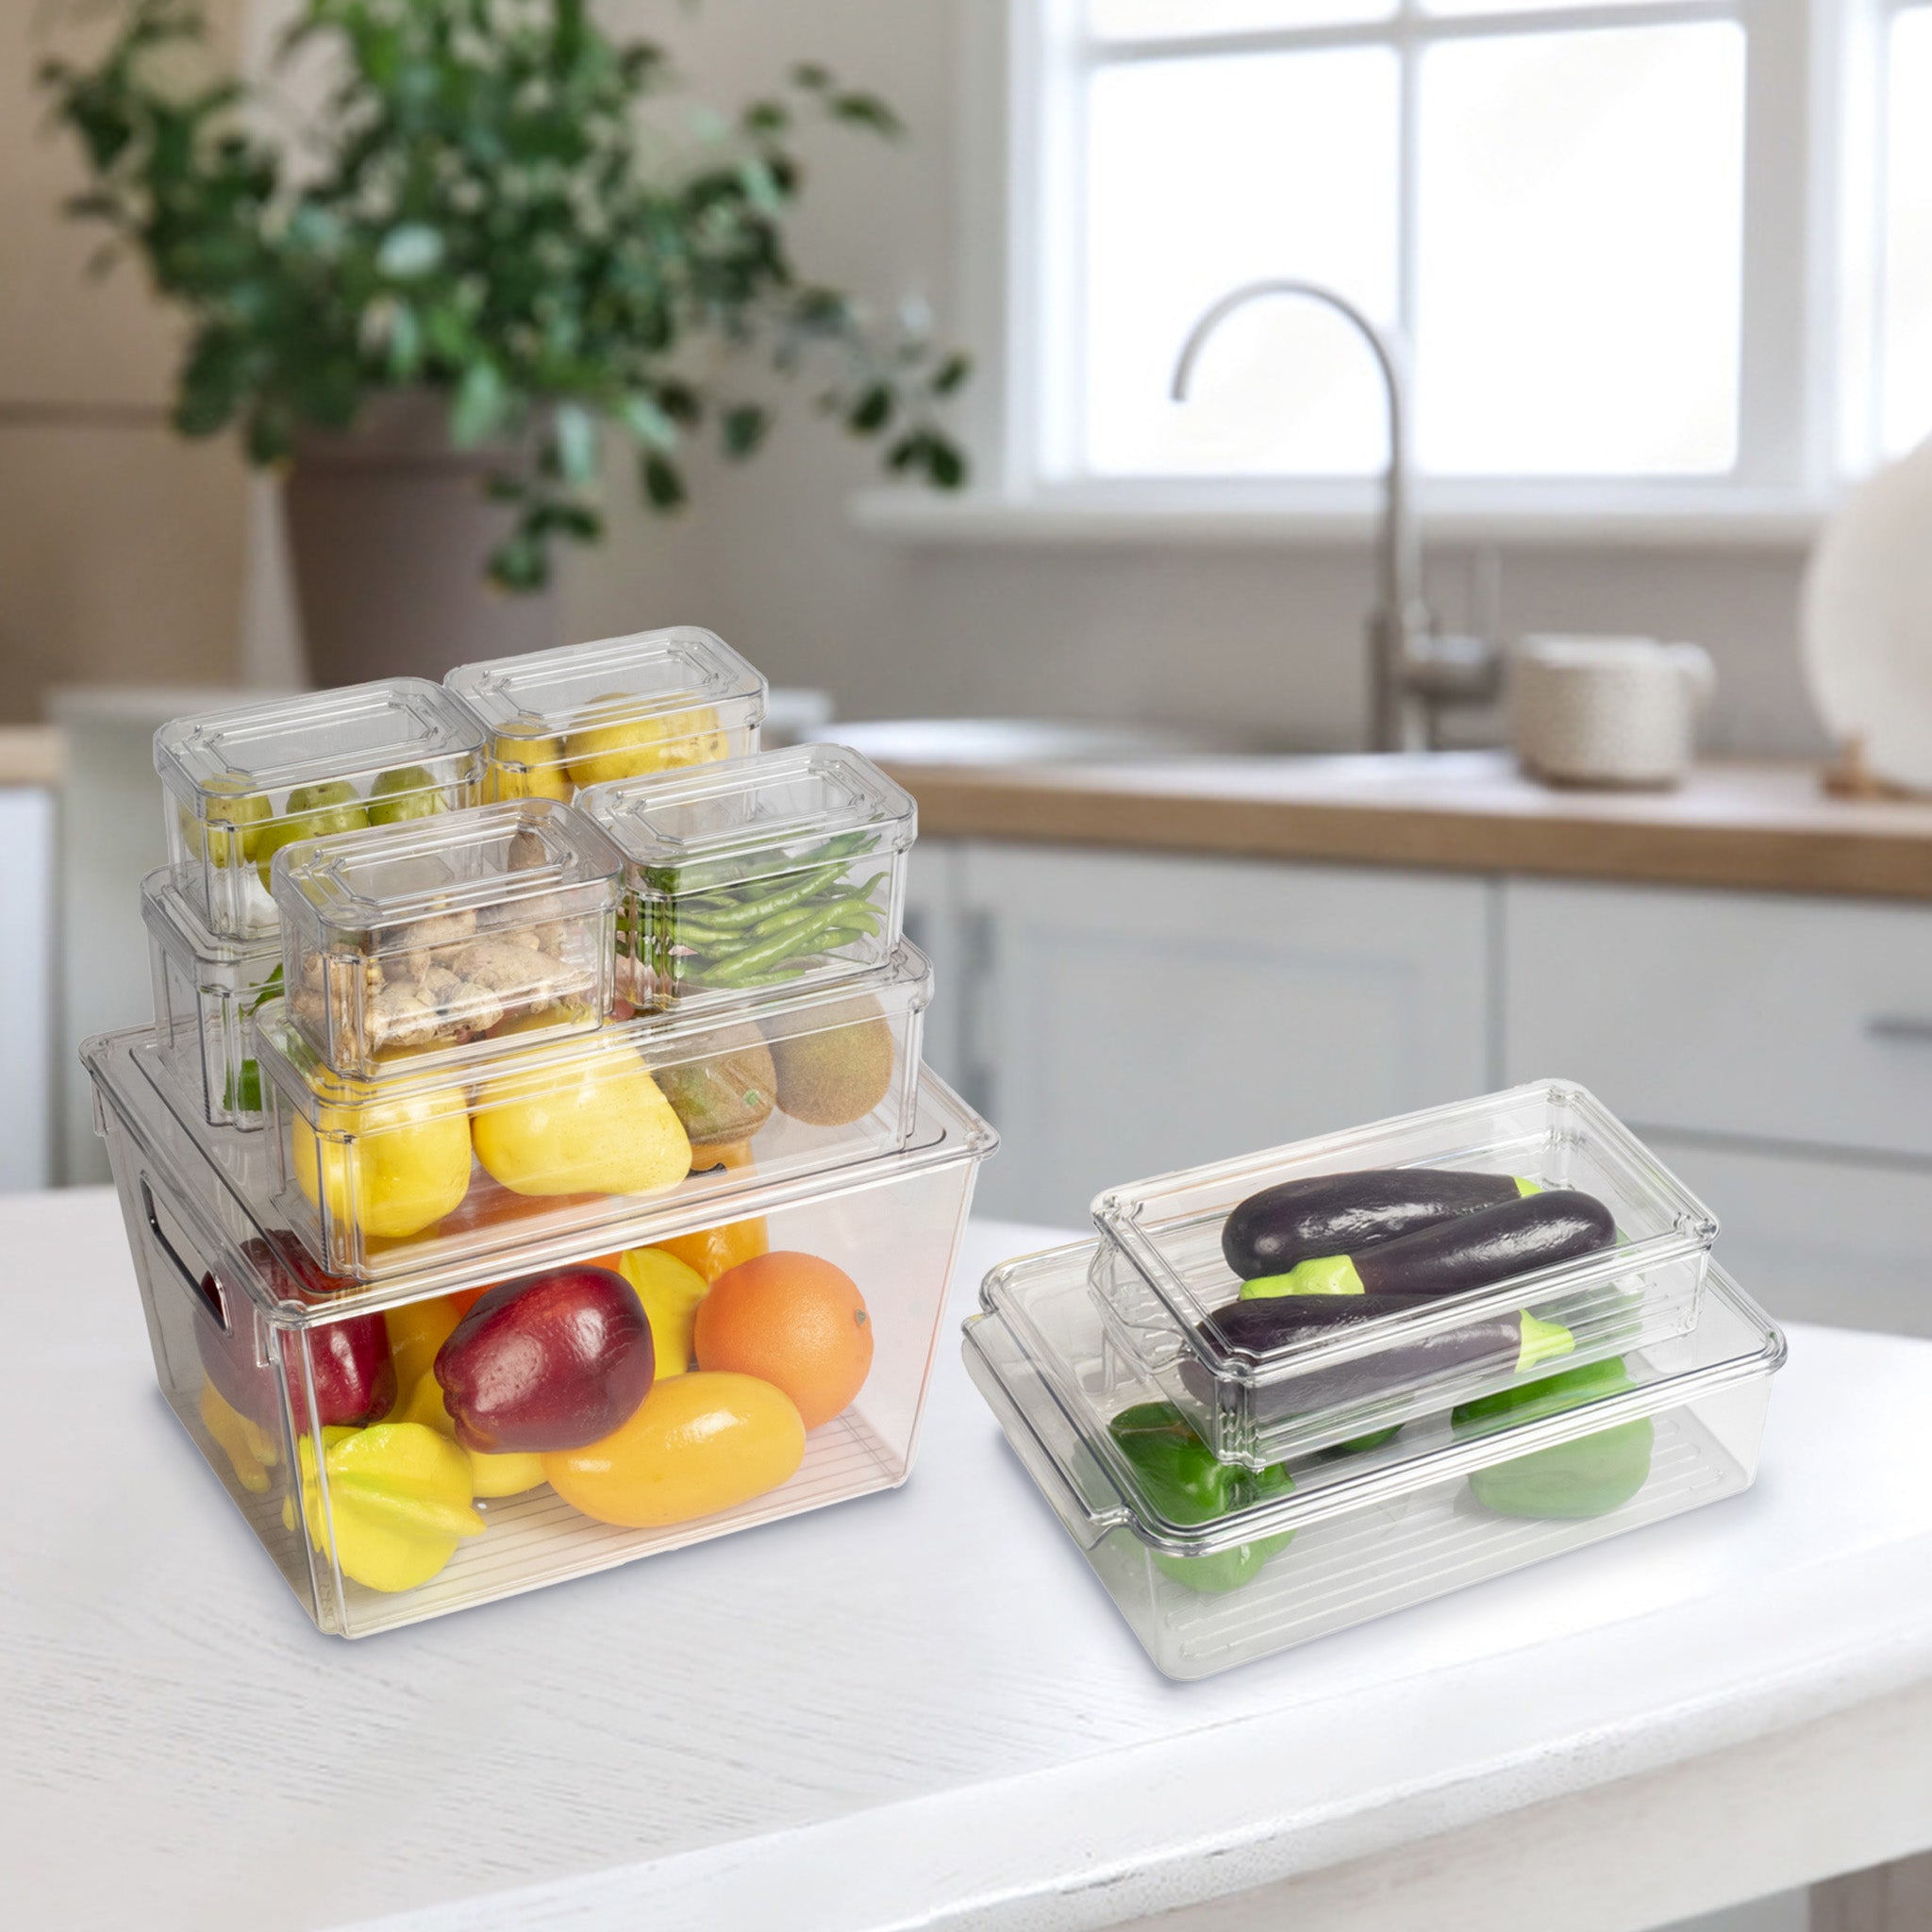 Basket & Containers : E-041 Food Keeper